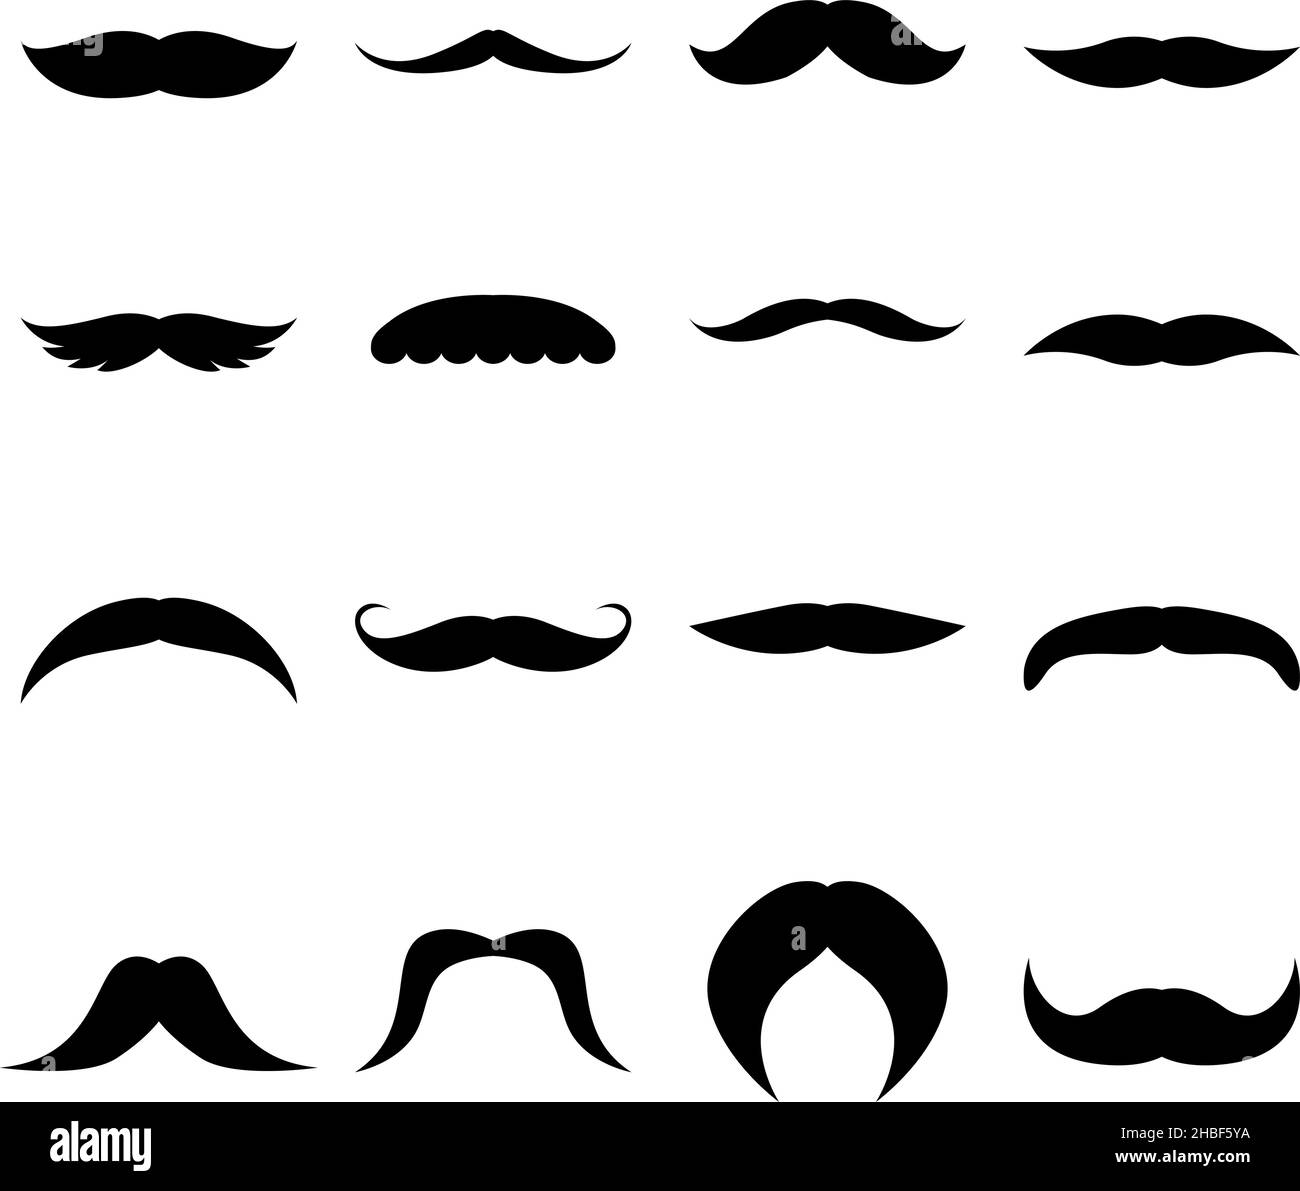 Set of moustaches, vector illustration Stock Vector